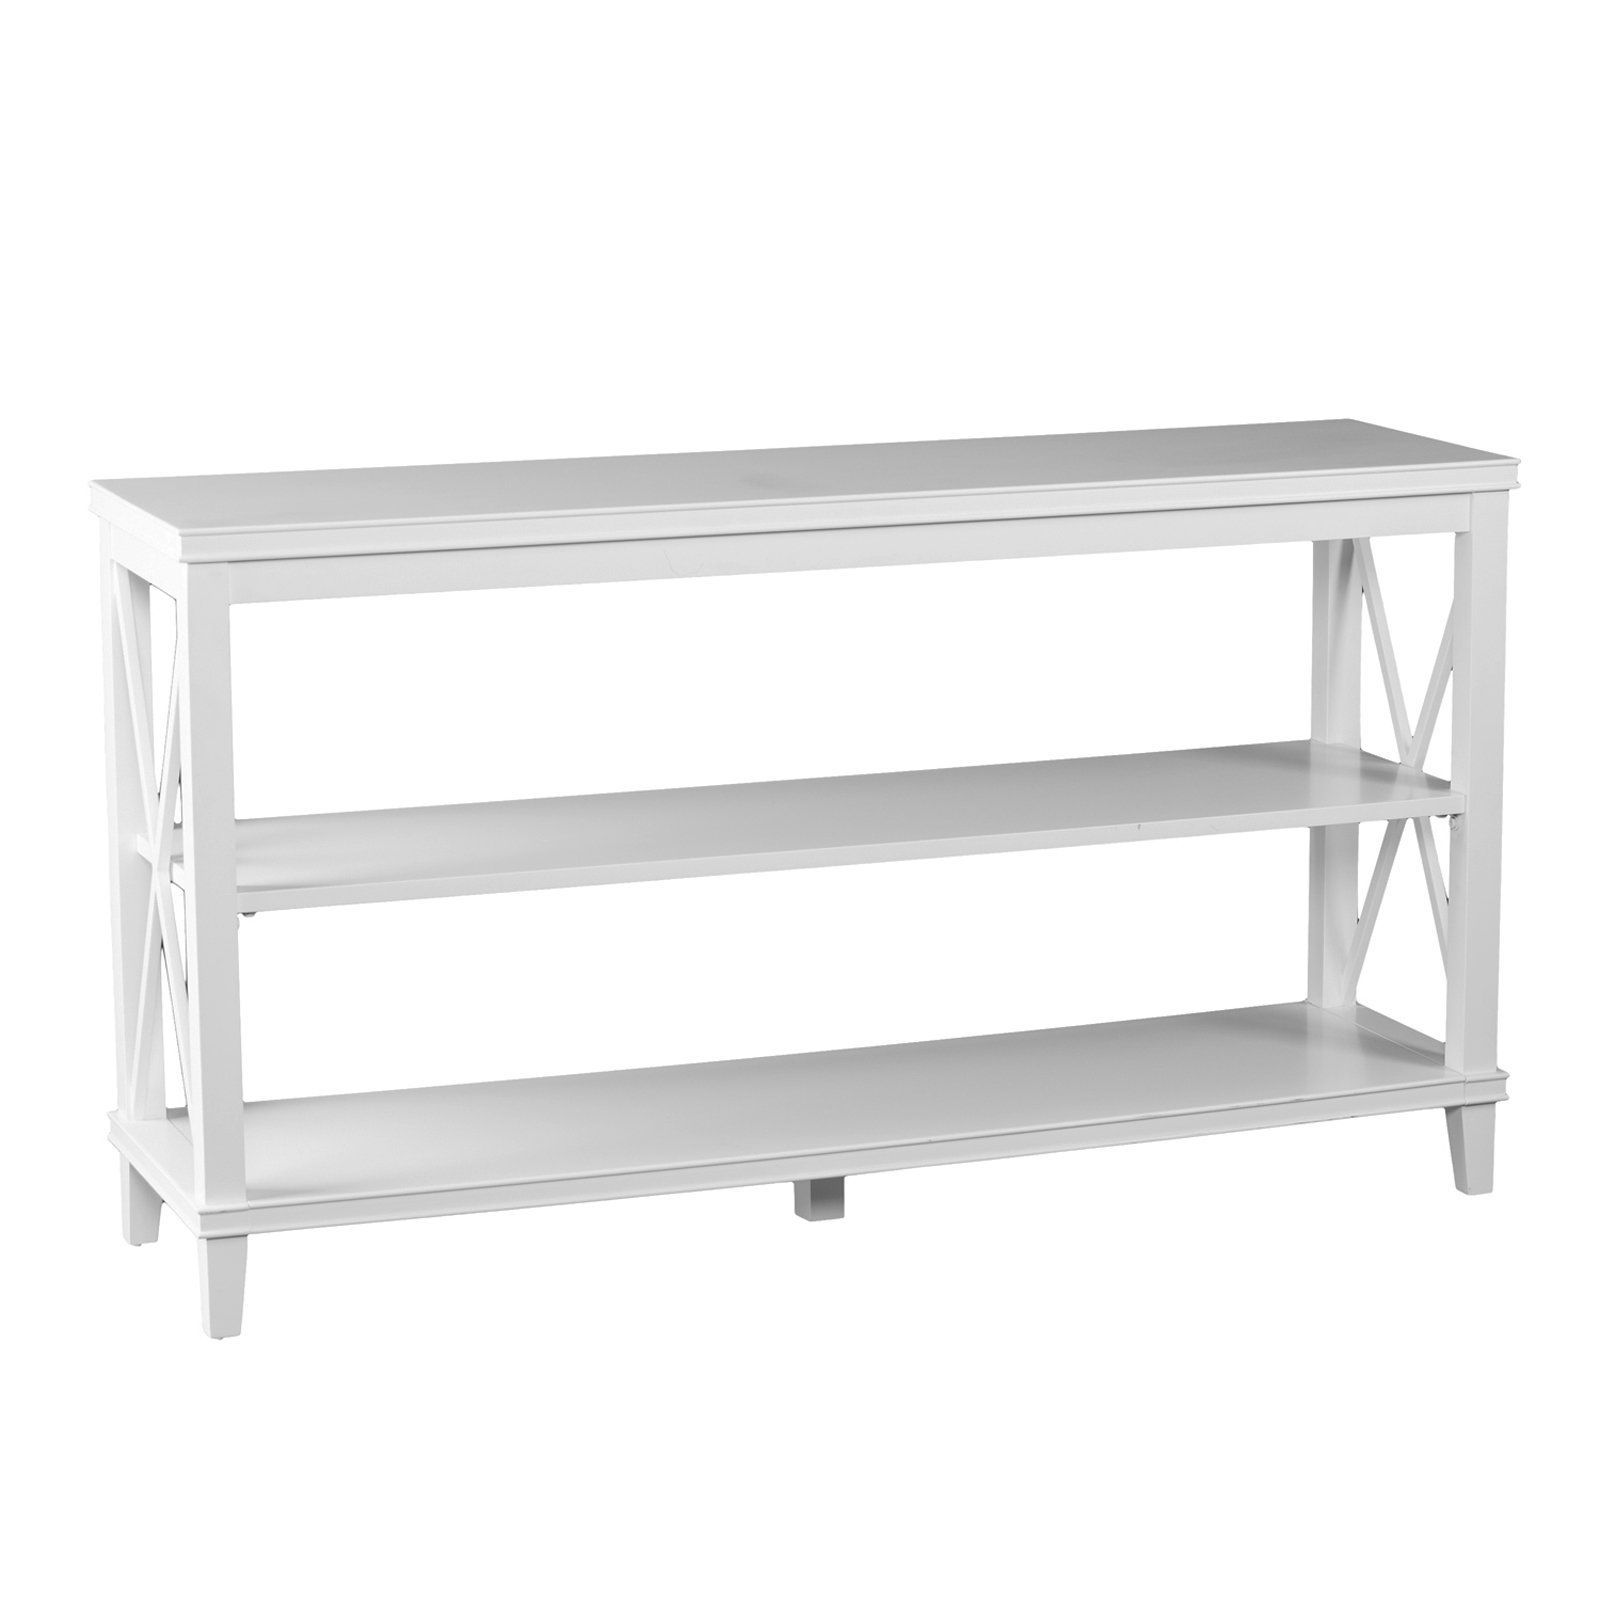 Southern Enterprises Larksmill Console Table In 2020 | Console Table Within Southern Enterprises Larksmill Coffee Tables (View 2 of 20)